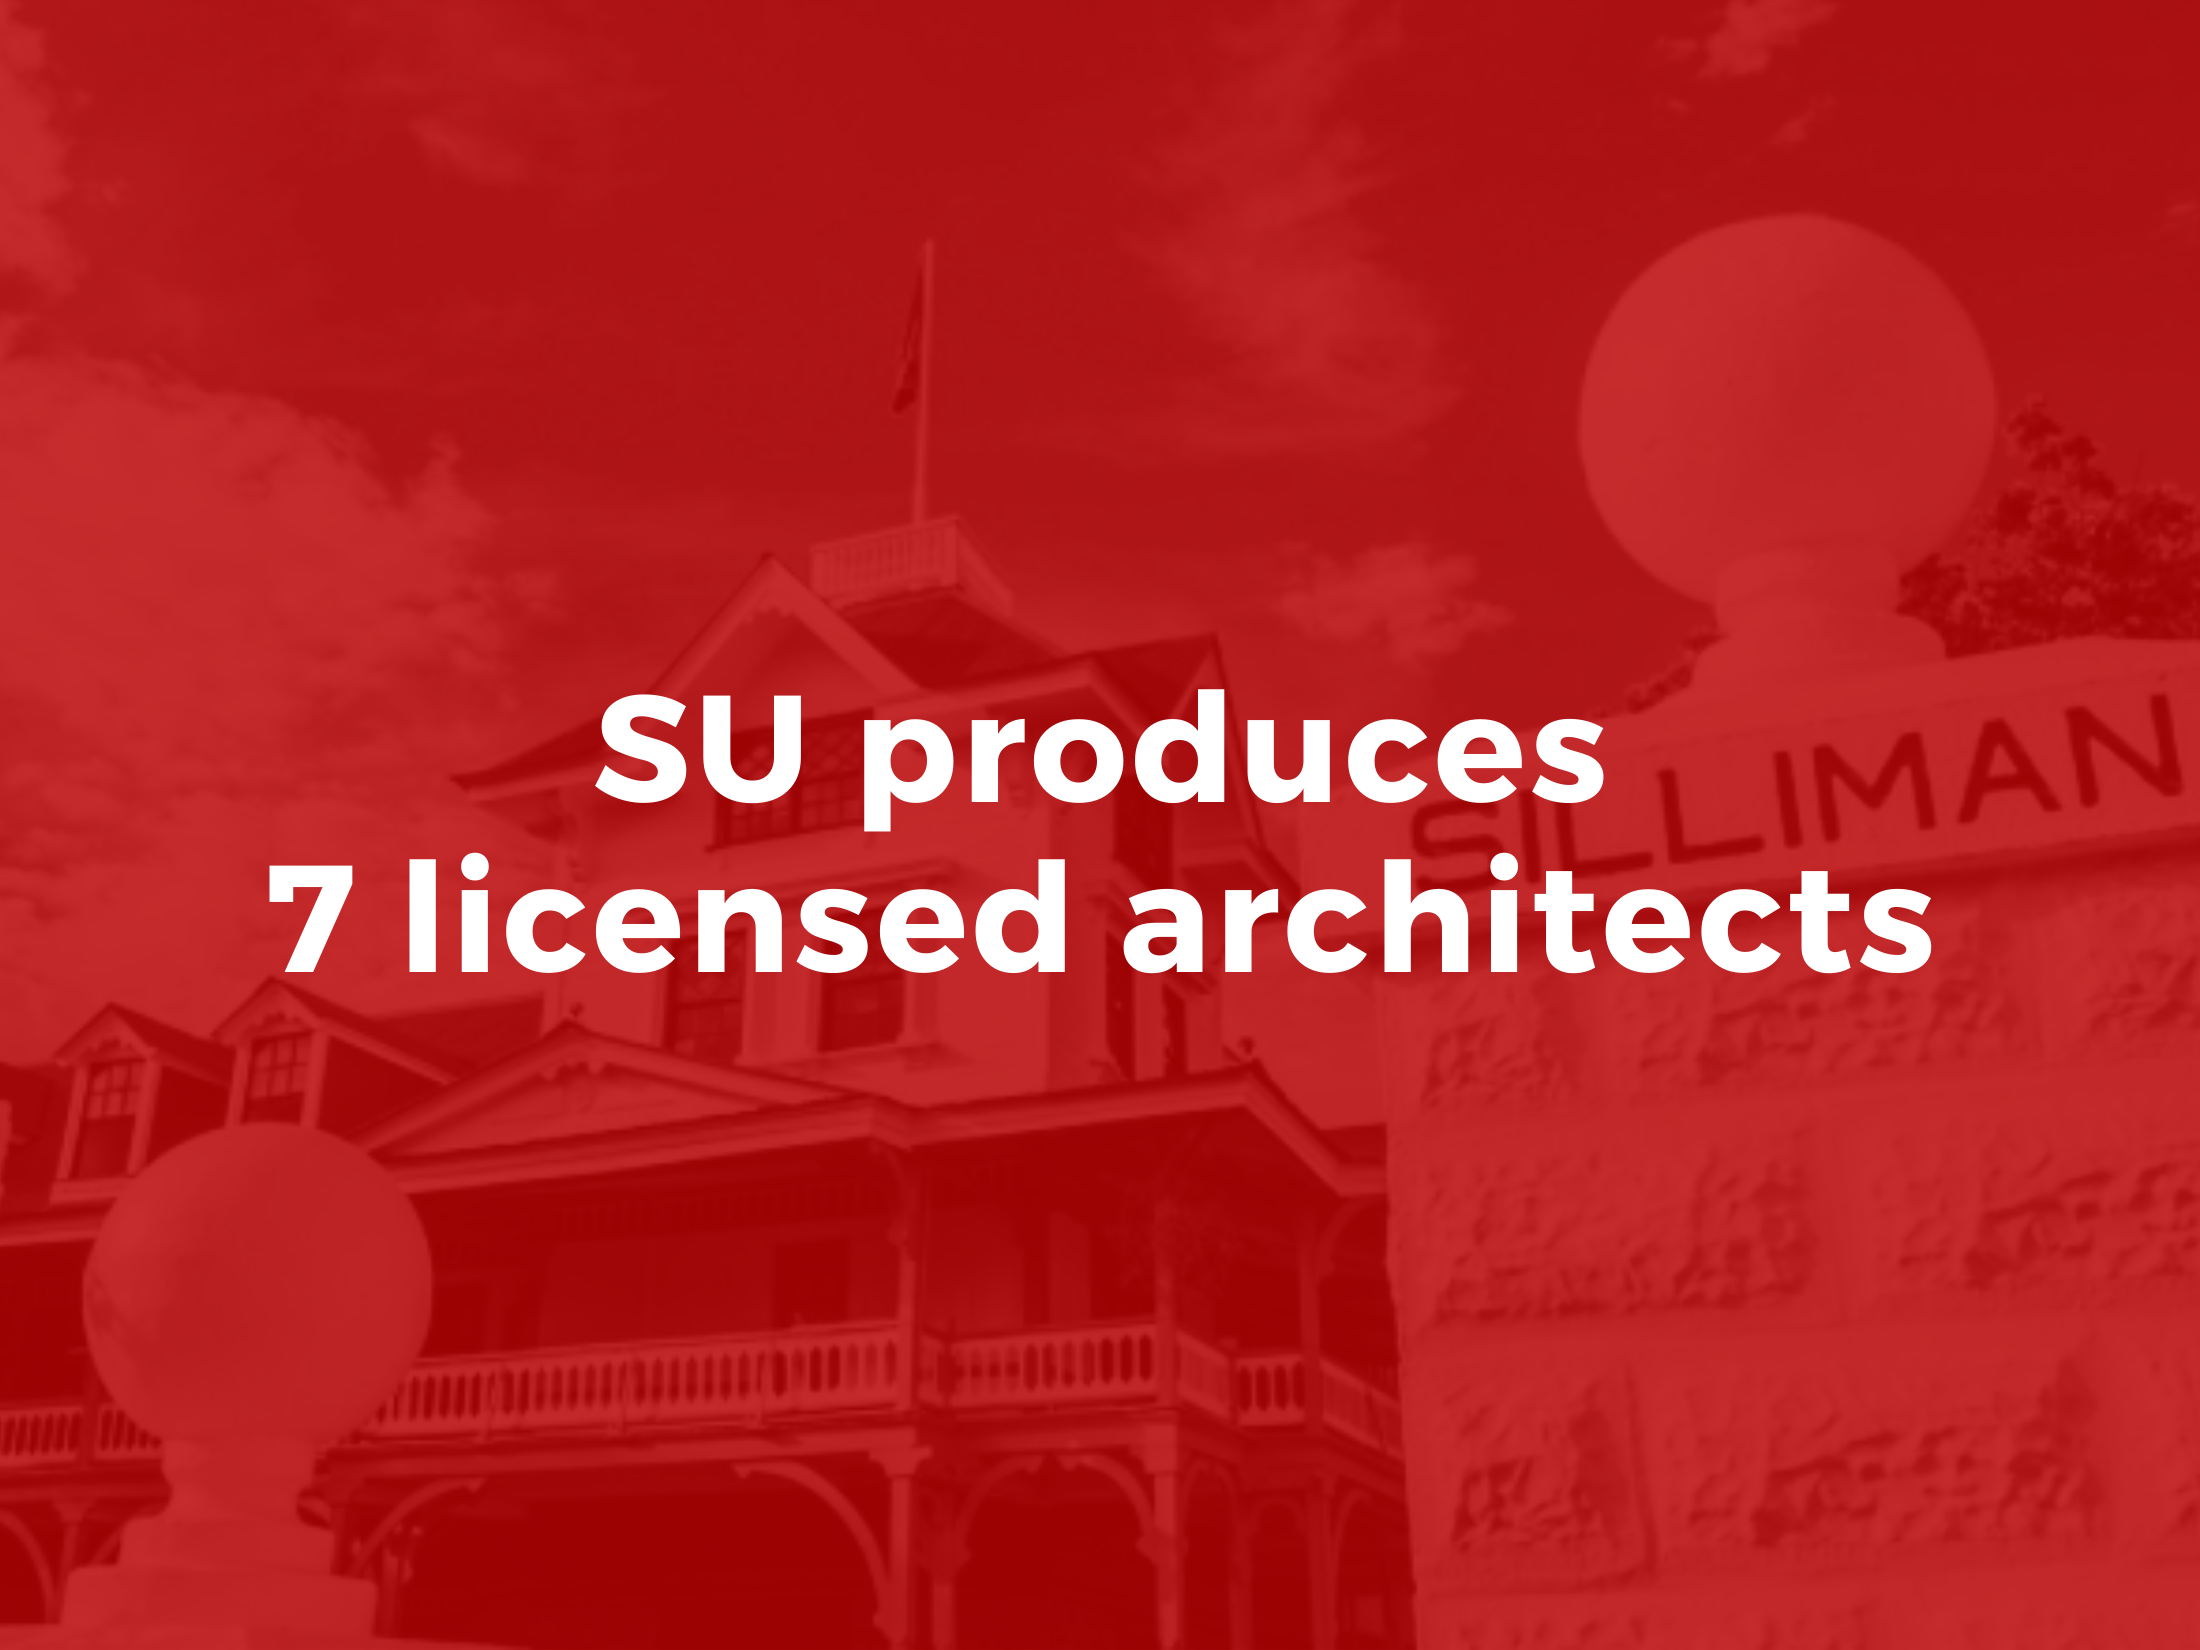 SU produces 7 licensed architects